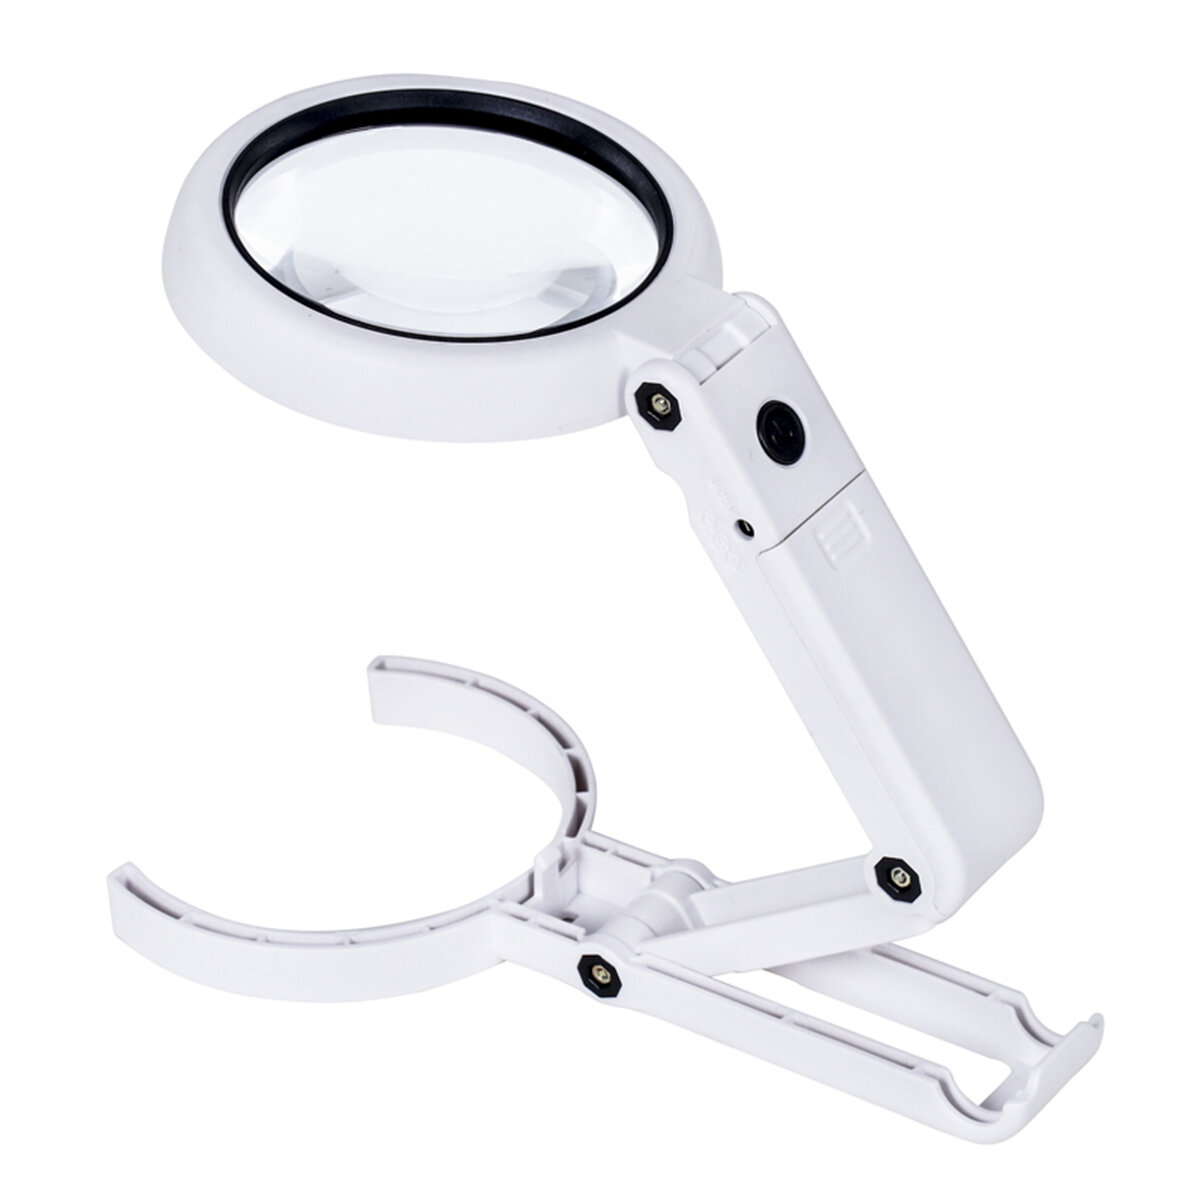 Handheld Portable Foldable Lamp Illuminated Magnifier 5X 11X Magnifying Table 8 LED Lights Loupe Mag